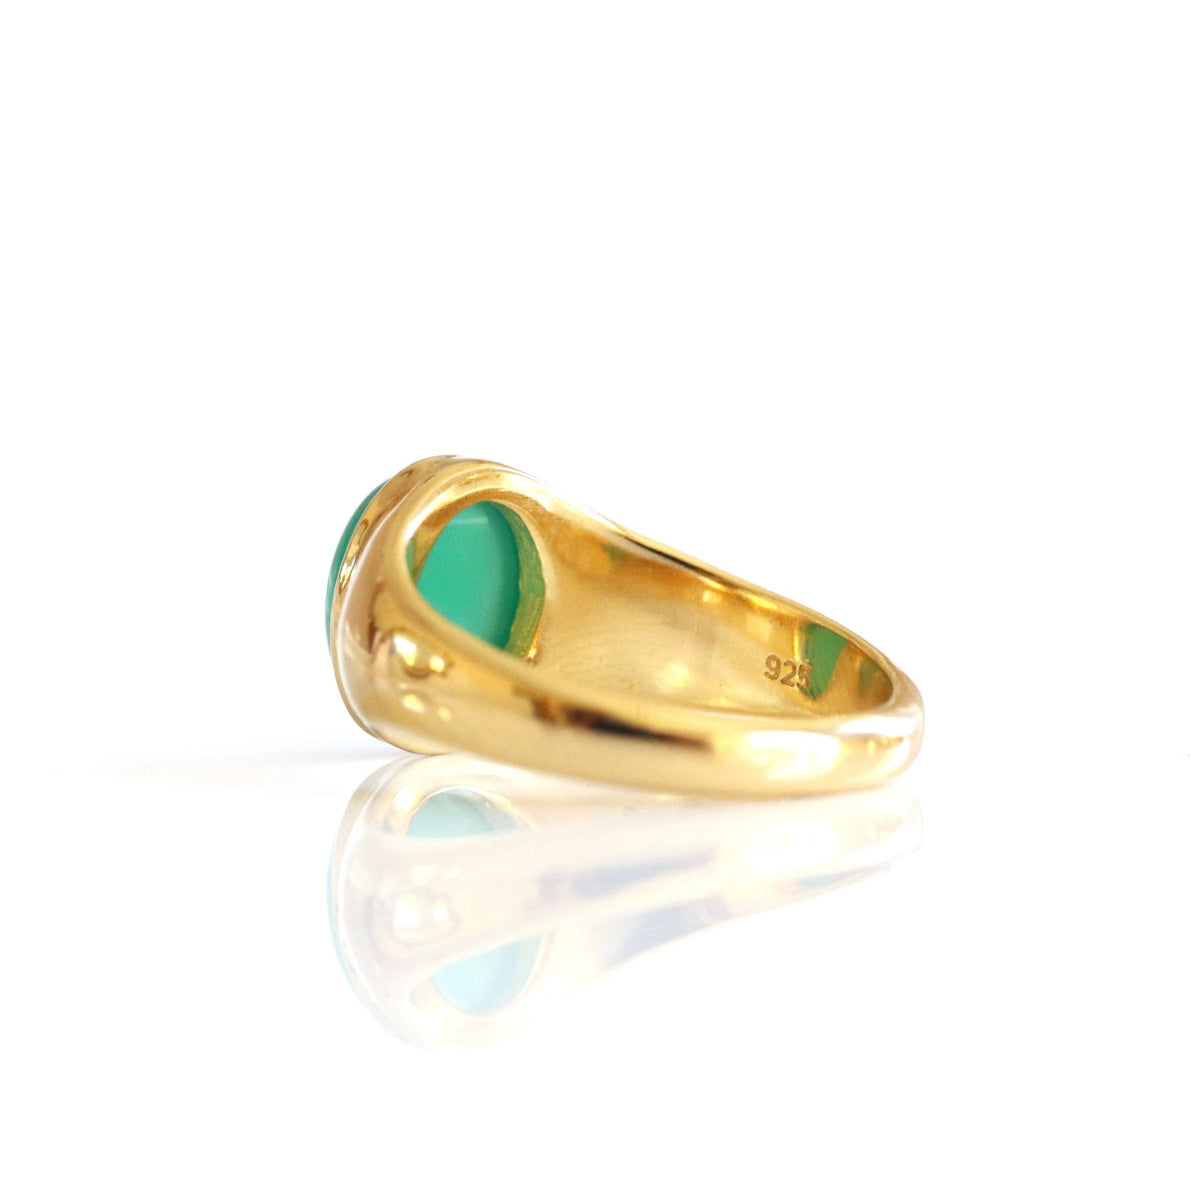 GLEE OVAL SIGNET RING - GREEN ONYX &amp; GOLD - SO PRETTY CARA COTTER